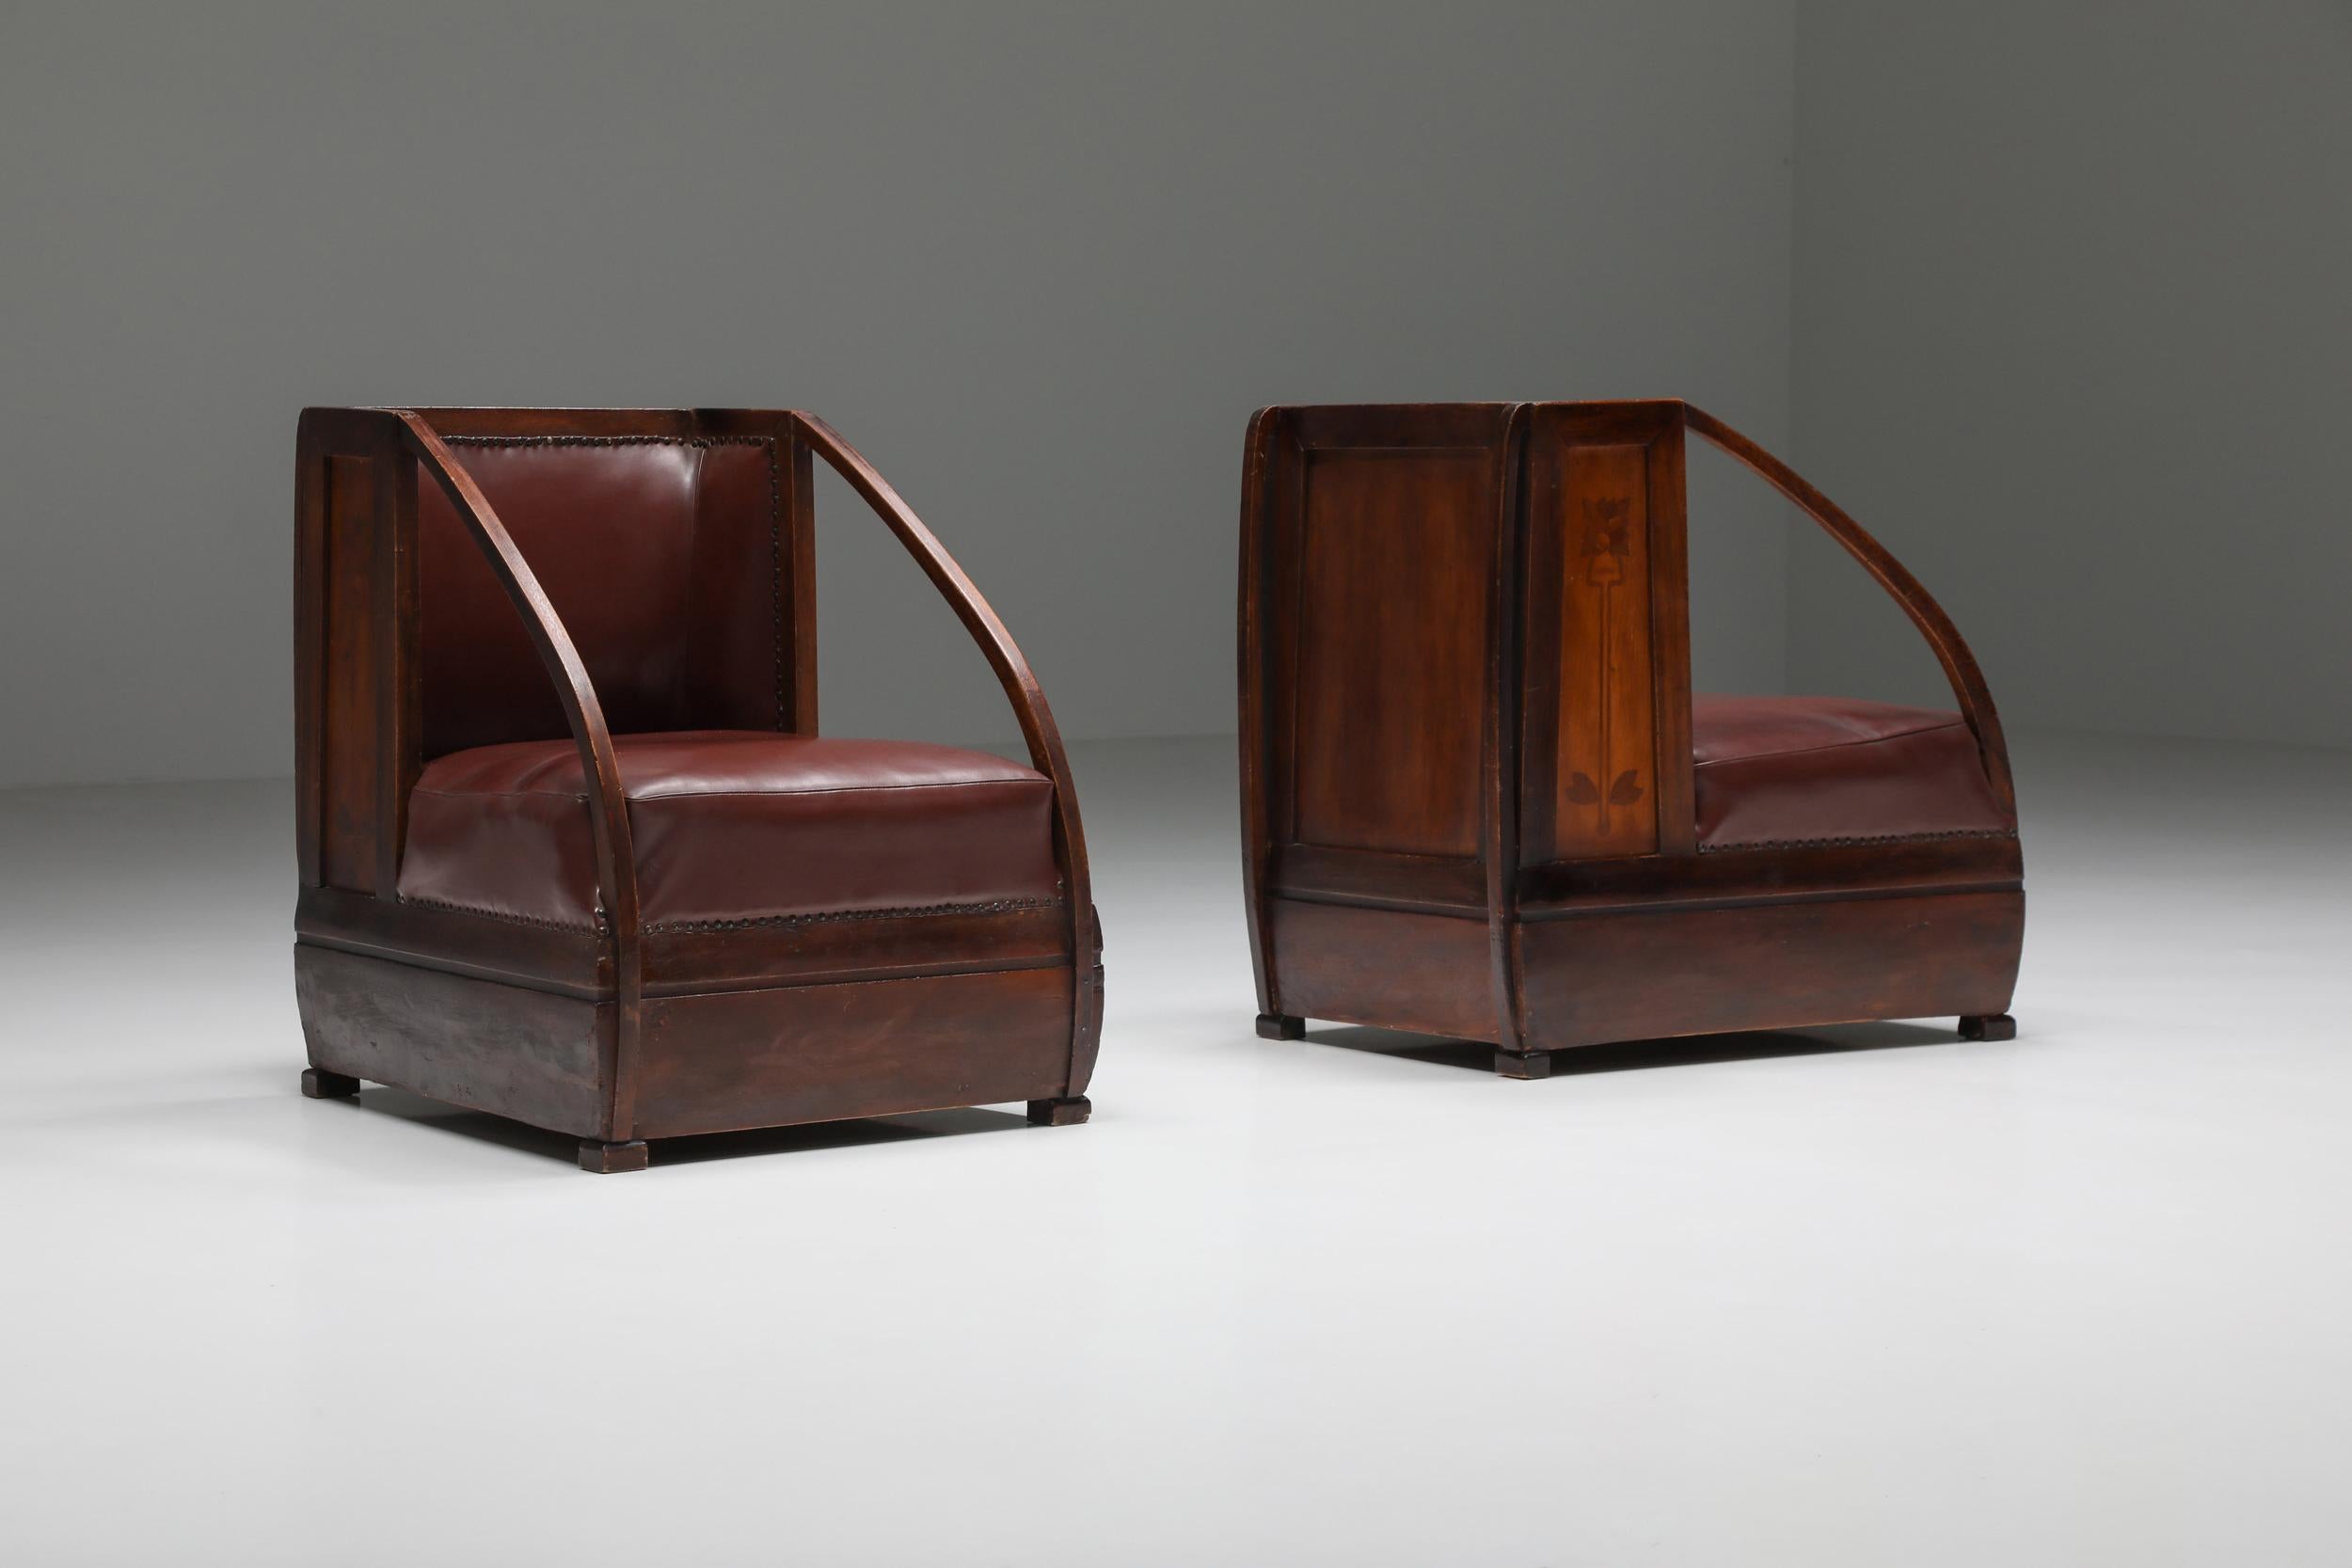 Art Nouveau, Carlo e Piero Zen, Italy, 1910, Italian design, 

Art Nouveau pair of armchairs by Carlo and Piero Zen. Remarkable use of mahogany, burgundy leather, and fruitwood inlay. Authentic and important historic design piece. Carlo and Piero